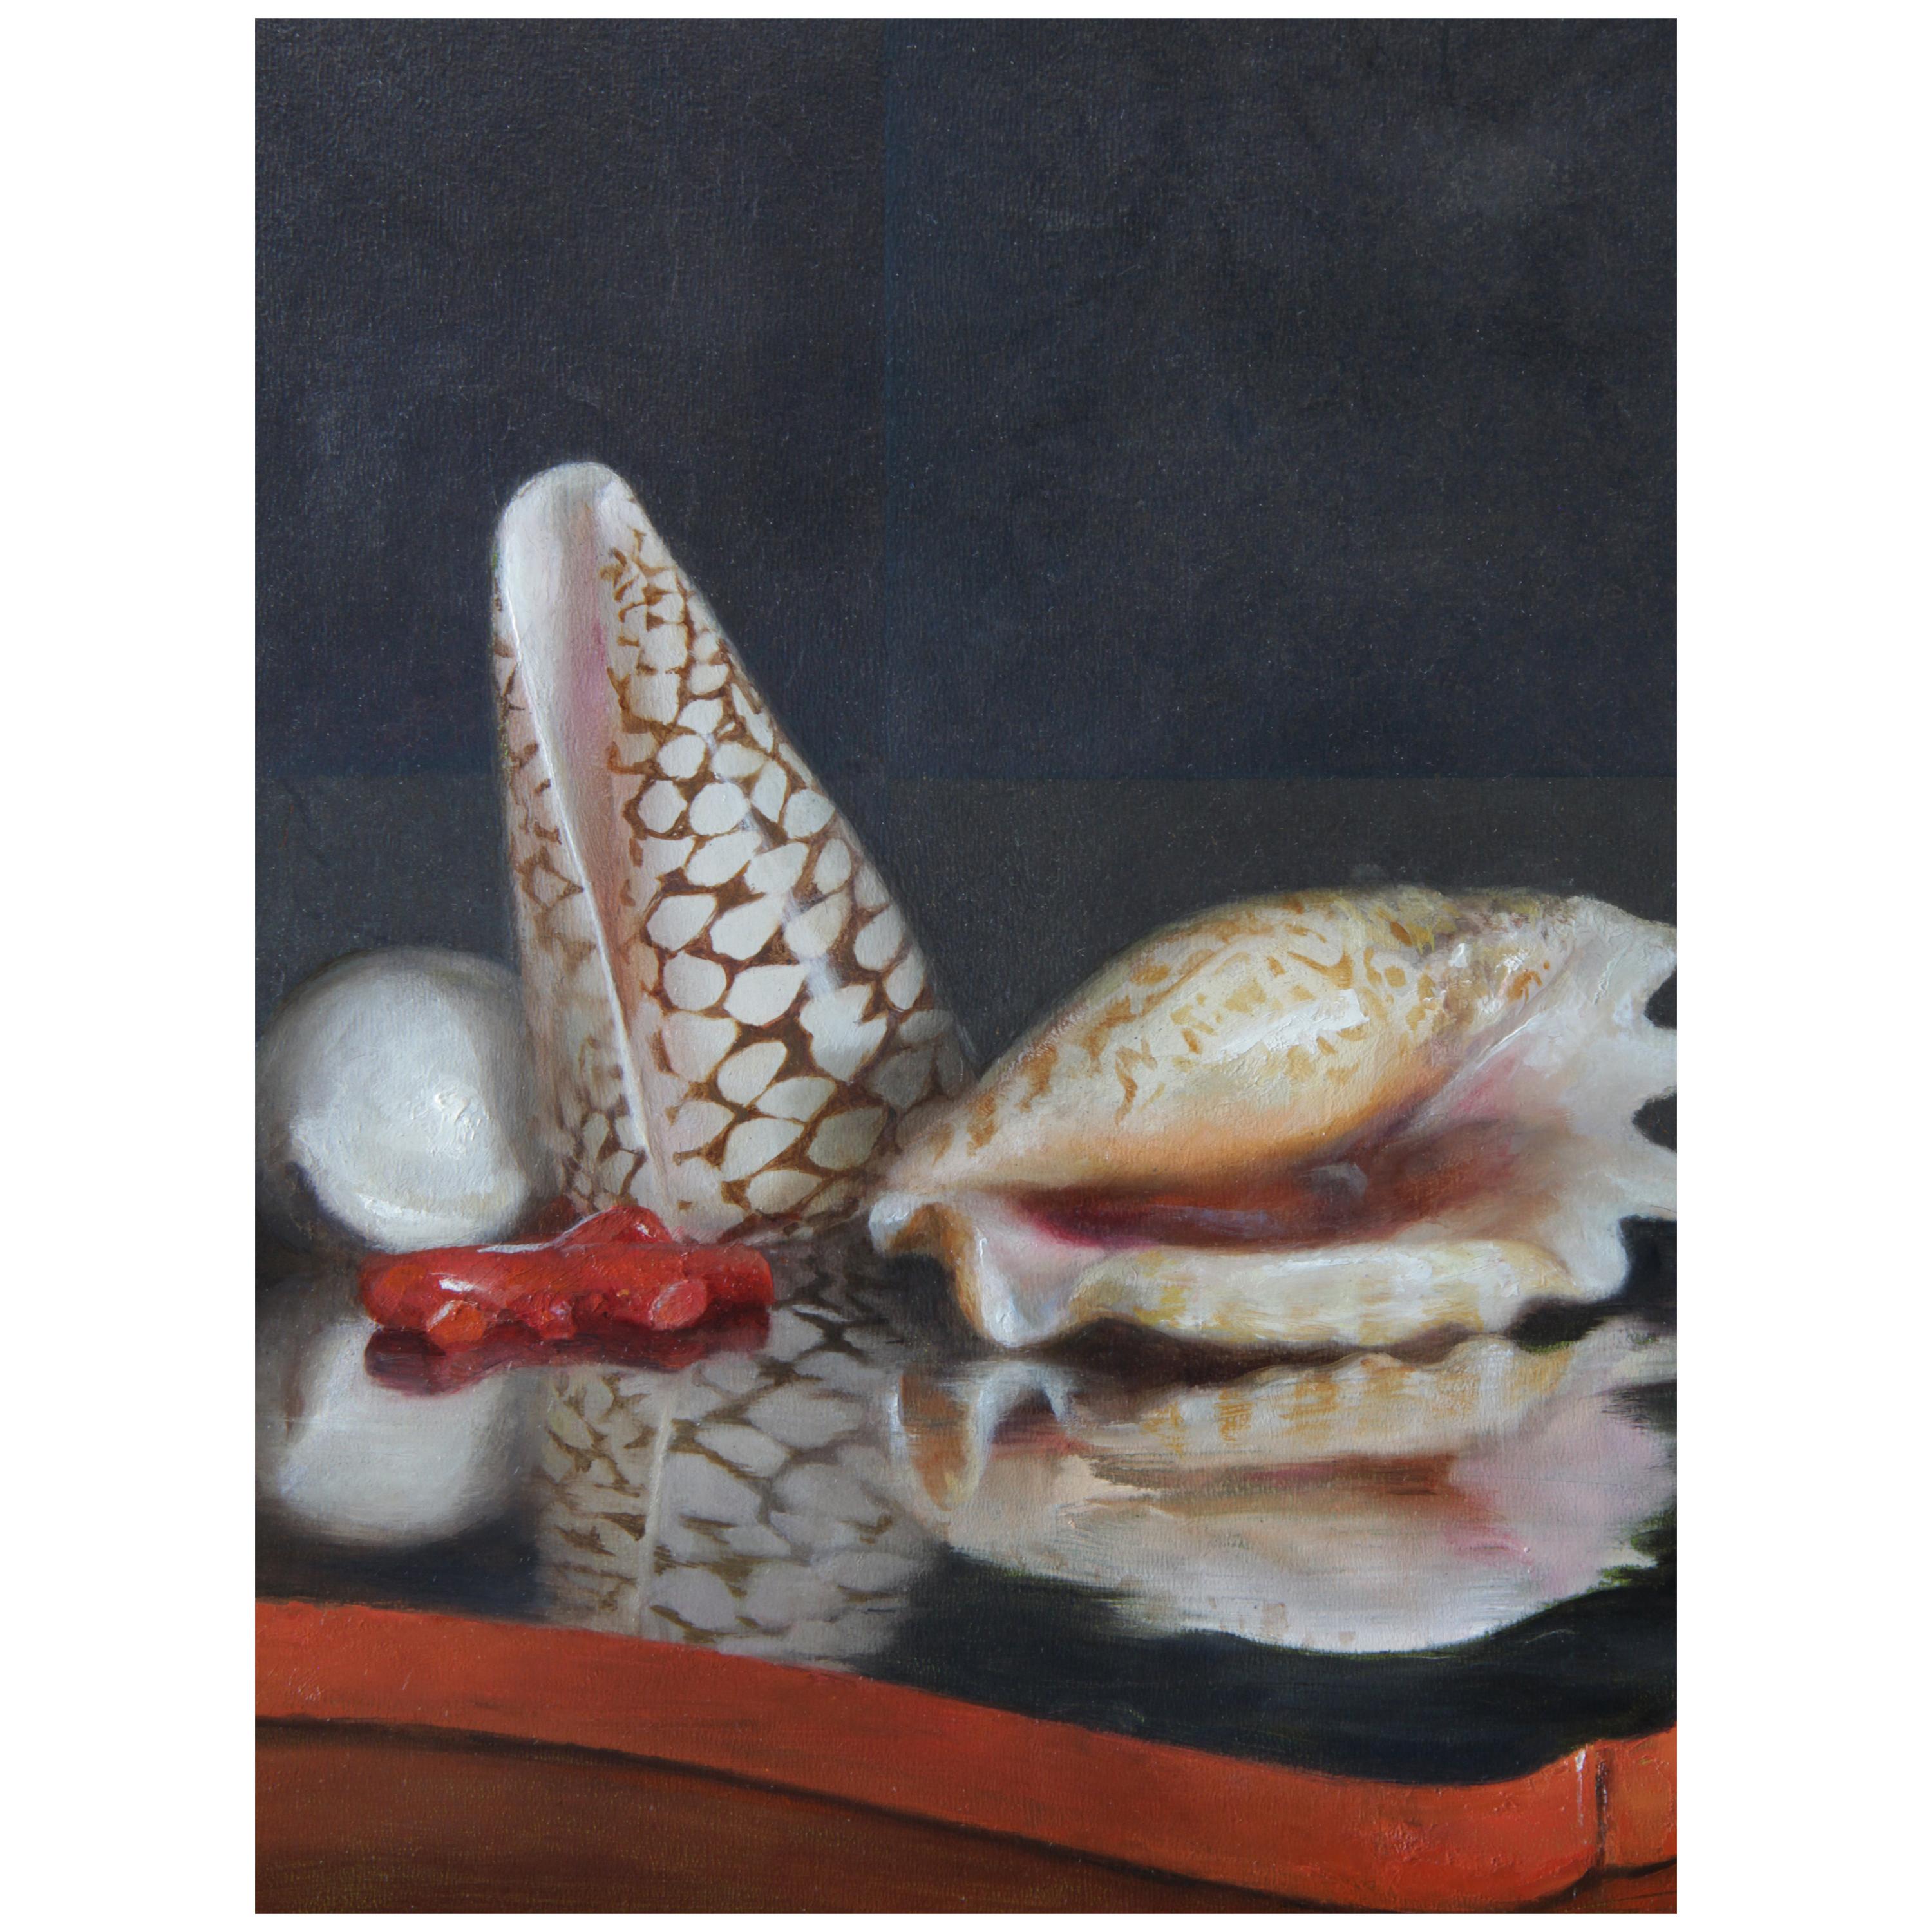 Sea Shells on Lacquer Tray, Oil on Panel with Silver Leaf Still Life Painting